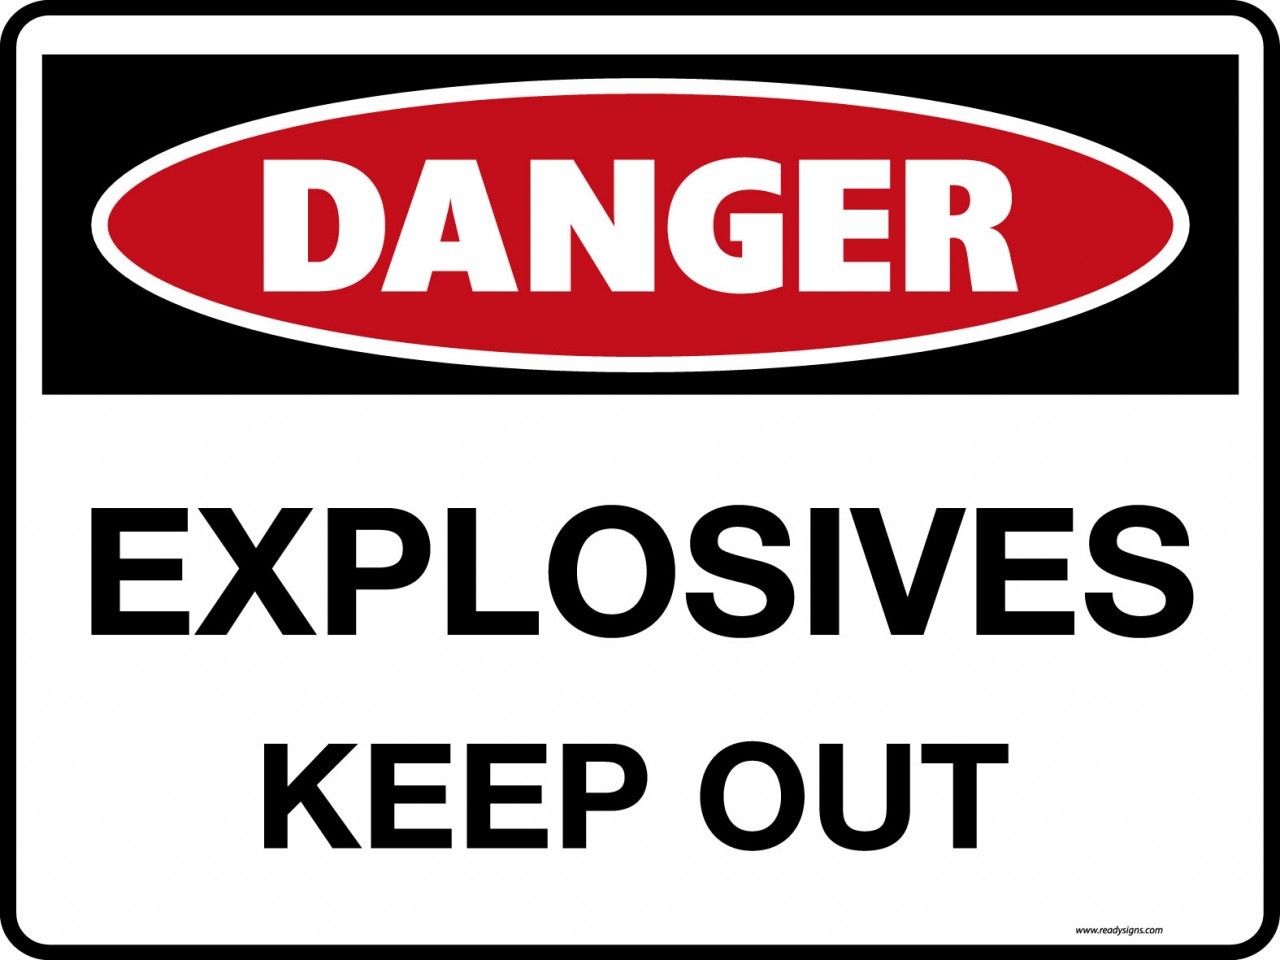 Danger Signs - Explosives Keep Out - Property Signs